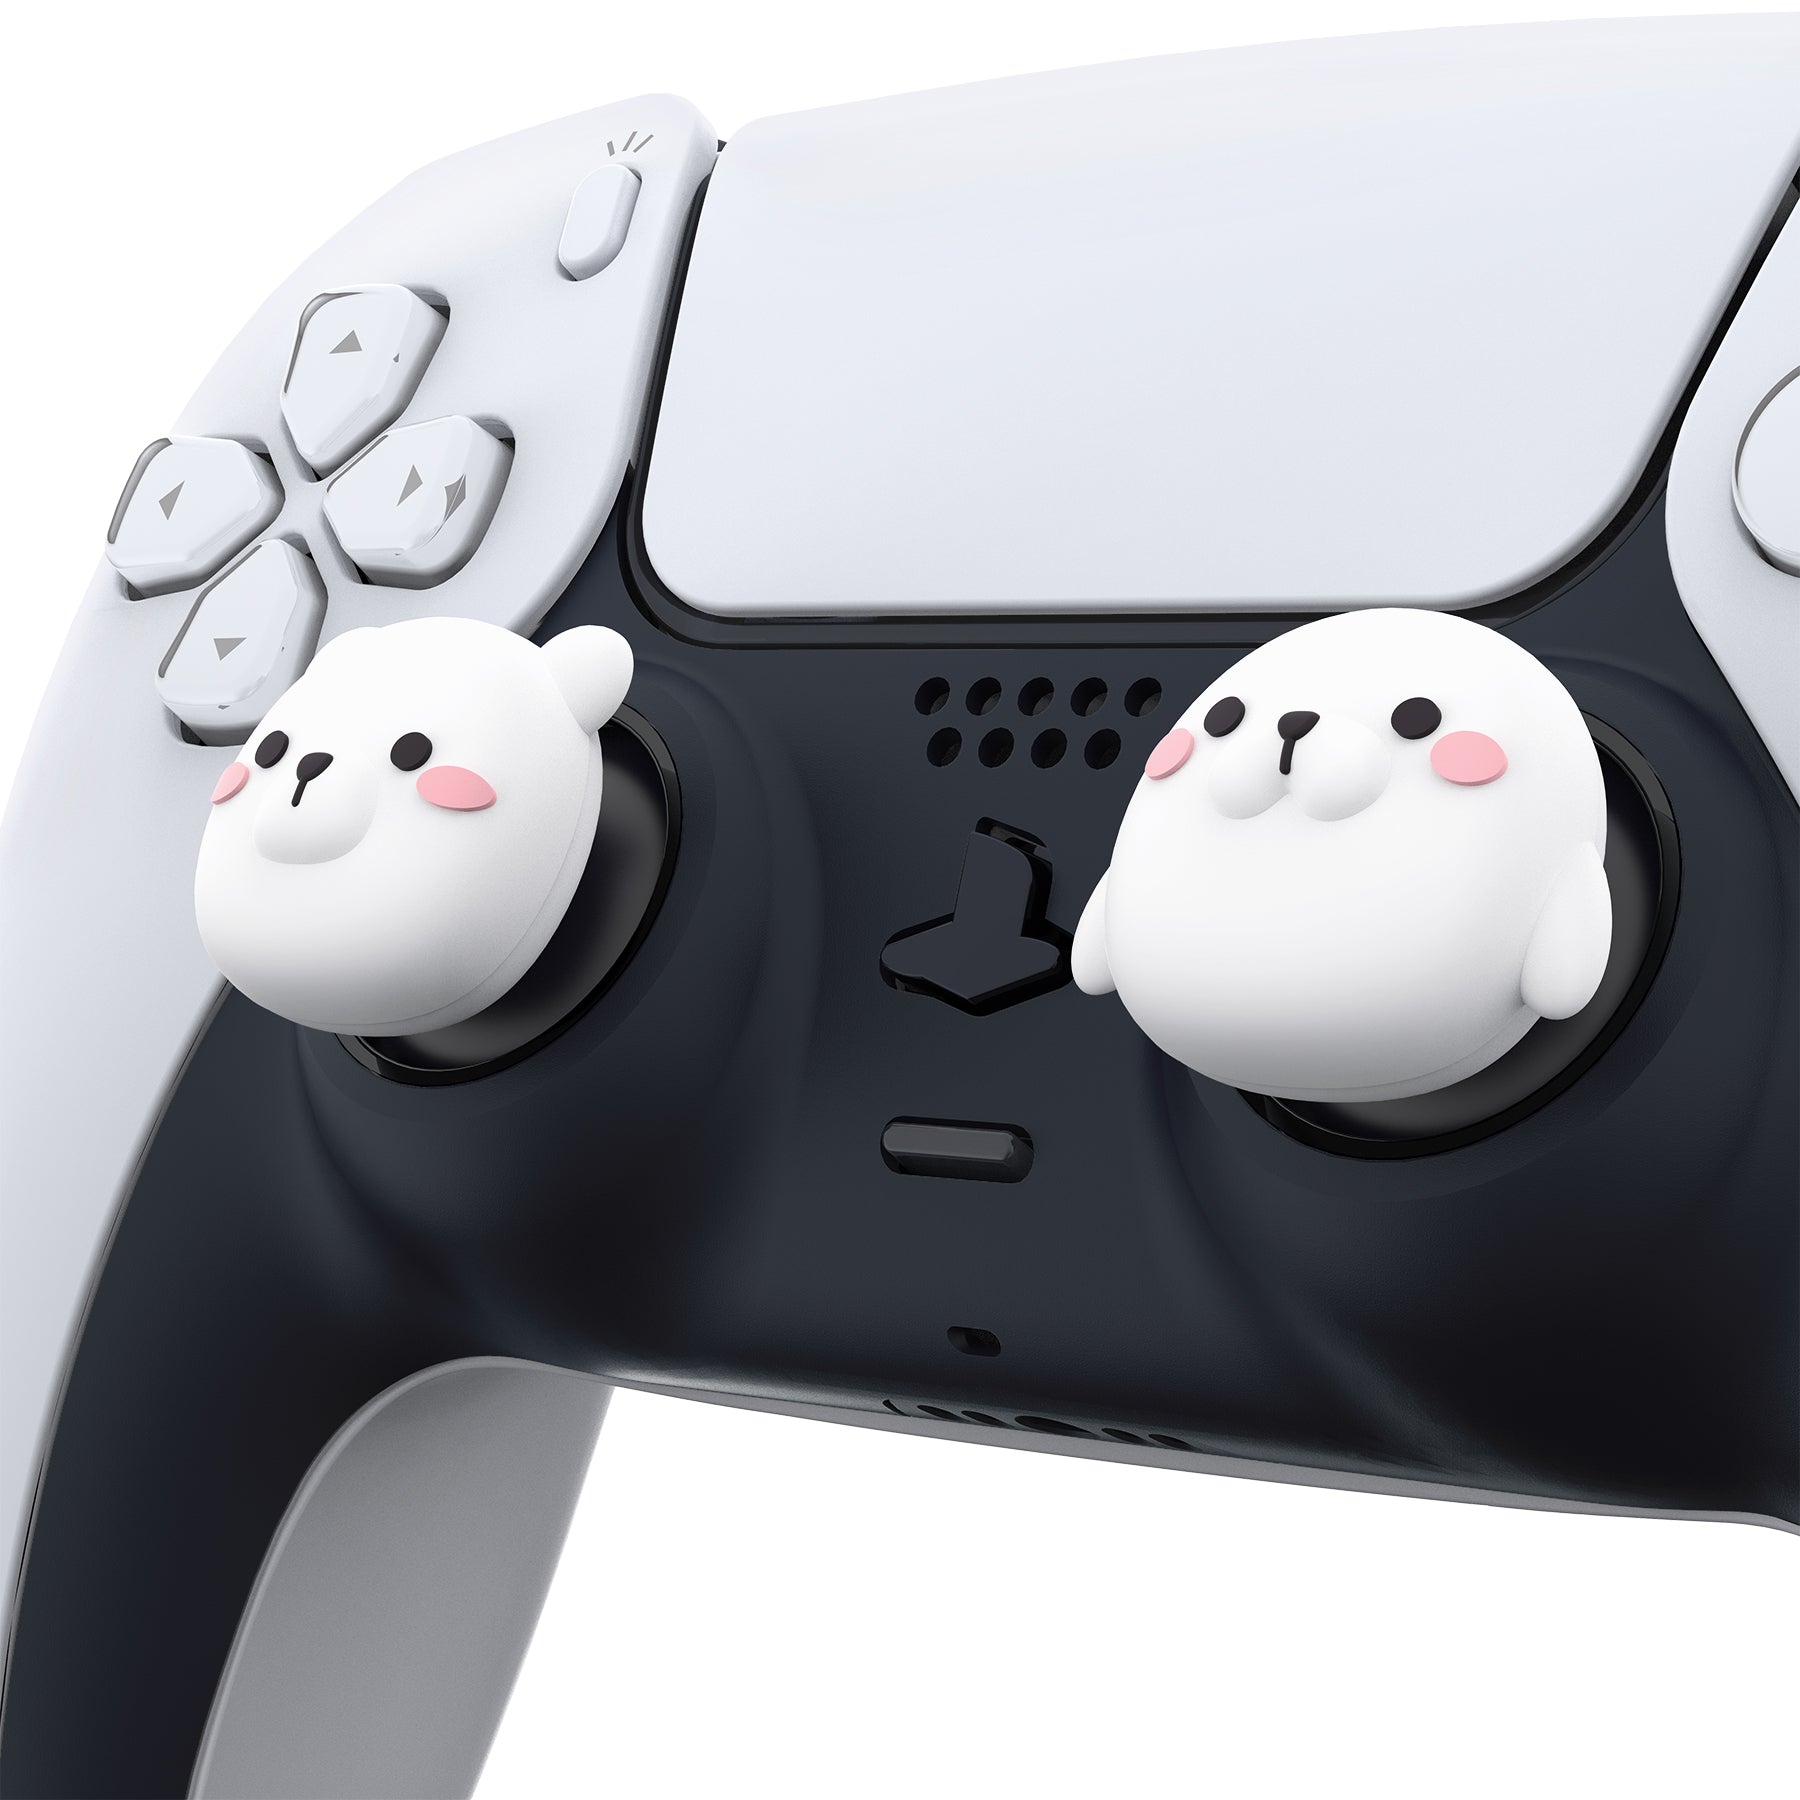 PlayVital Cute Thumb Grip Caps for ps5/4 Controller, Silicone Analog Stick Caps Cover for Xbox Series X/S, Thumbstick Caps for Switch Pro Controller - Polar Bear & Baby Seal - PJM3016 PlayVital